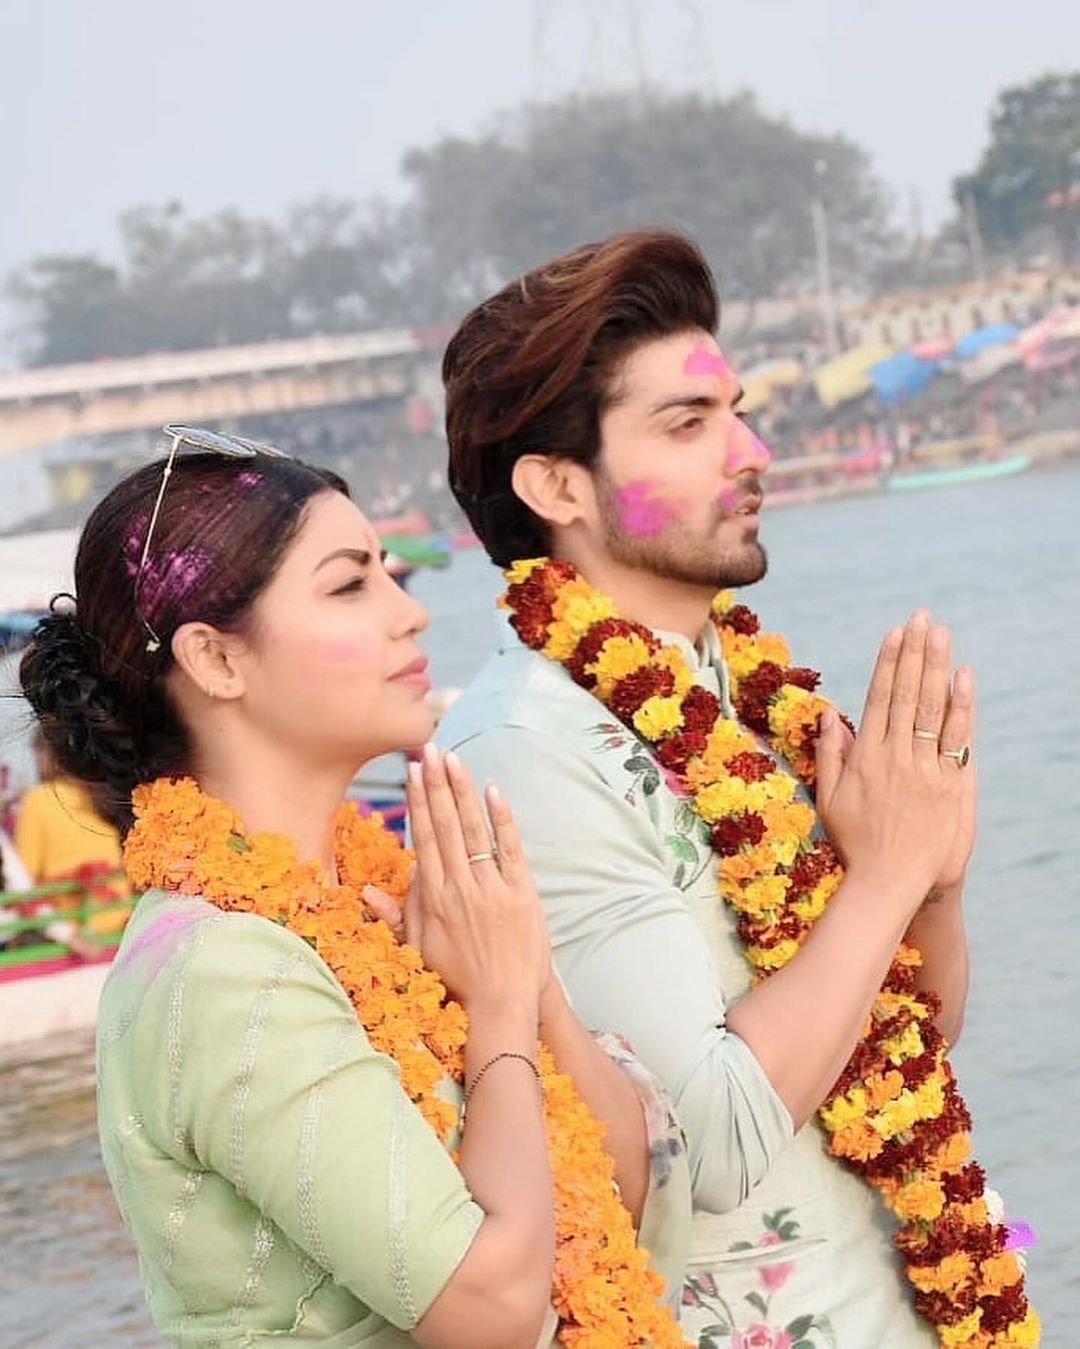 Cute Ramayan Couple Gurmeet Choudhary And Debina Bonnerjee Say The Connection Is Eternal. We Are Truly Truly Blessed! 